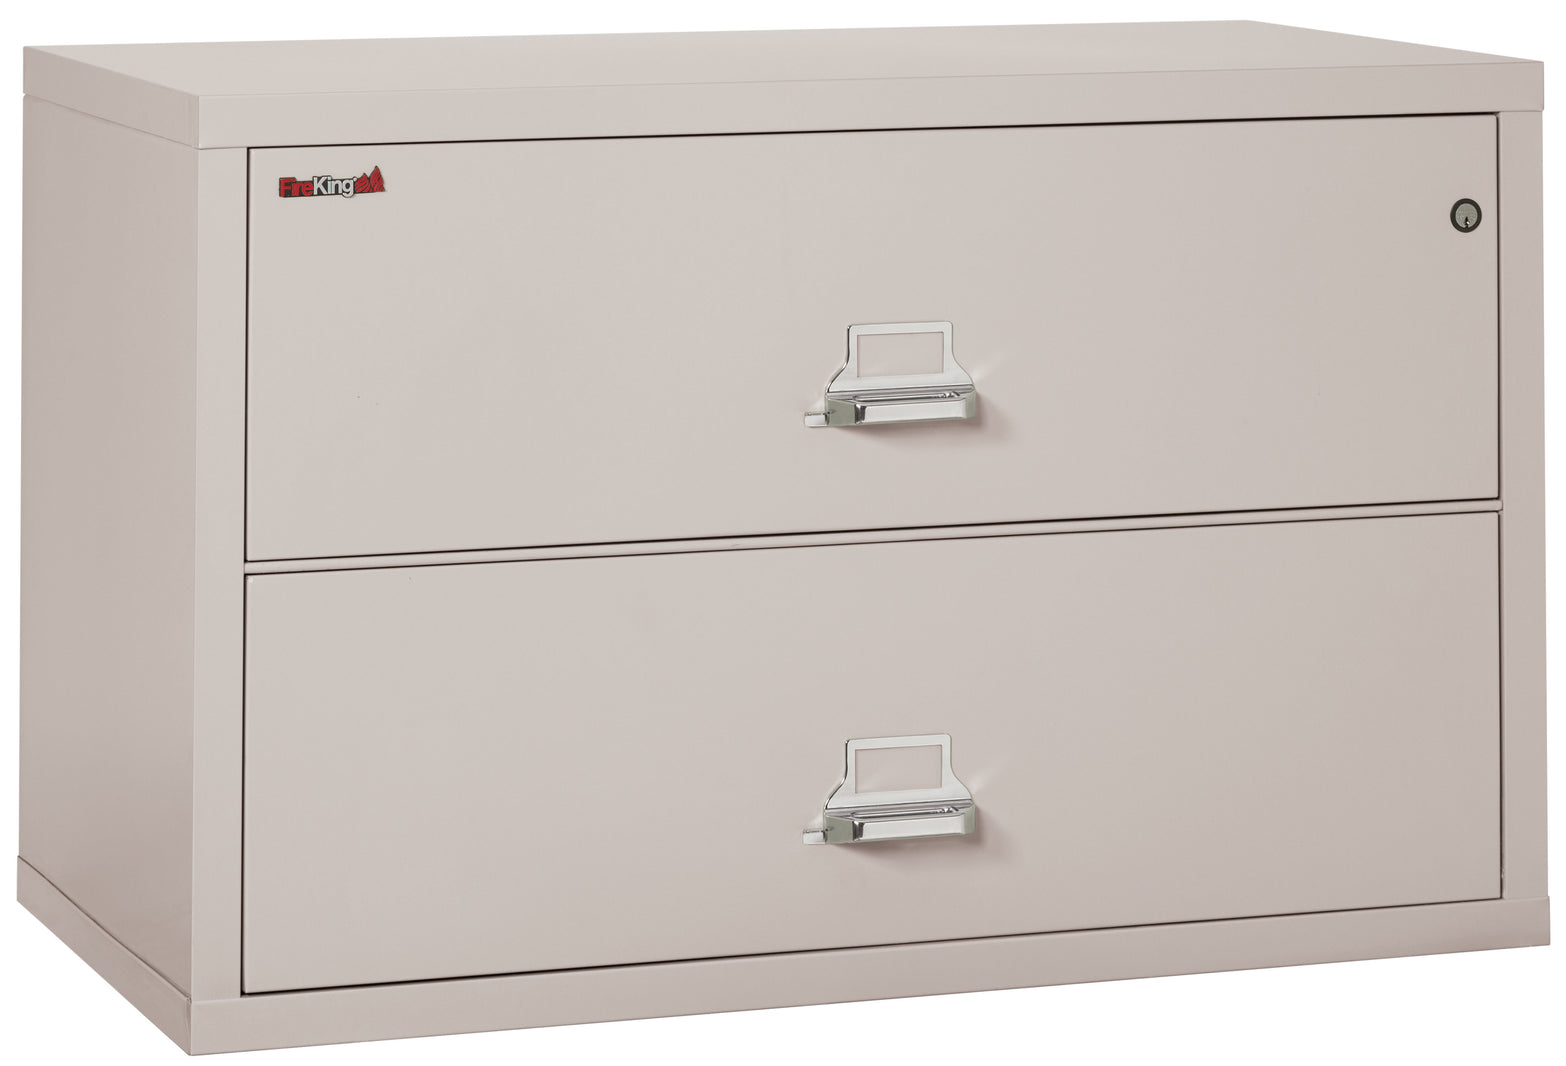 FireKing 2-4422-C Two Drawer 44" W Lateral Fire File Cabinet